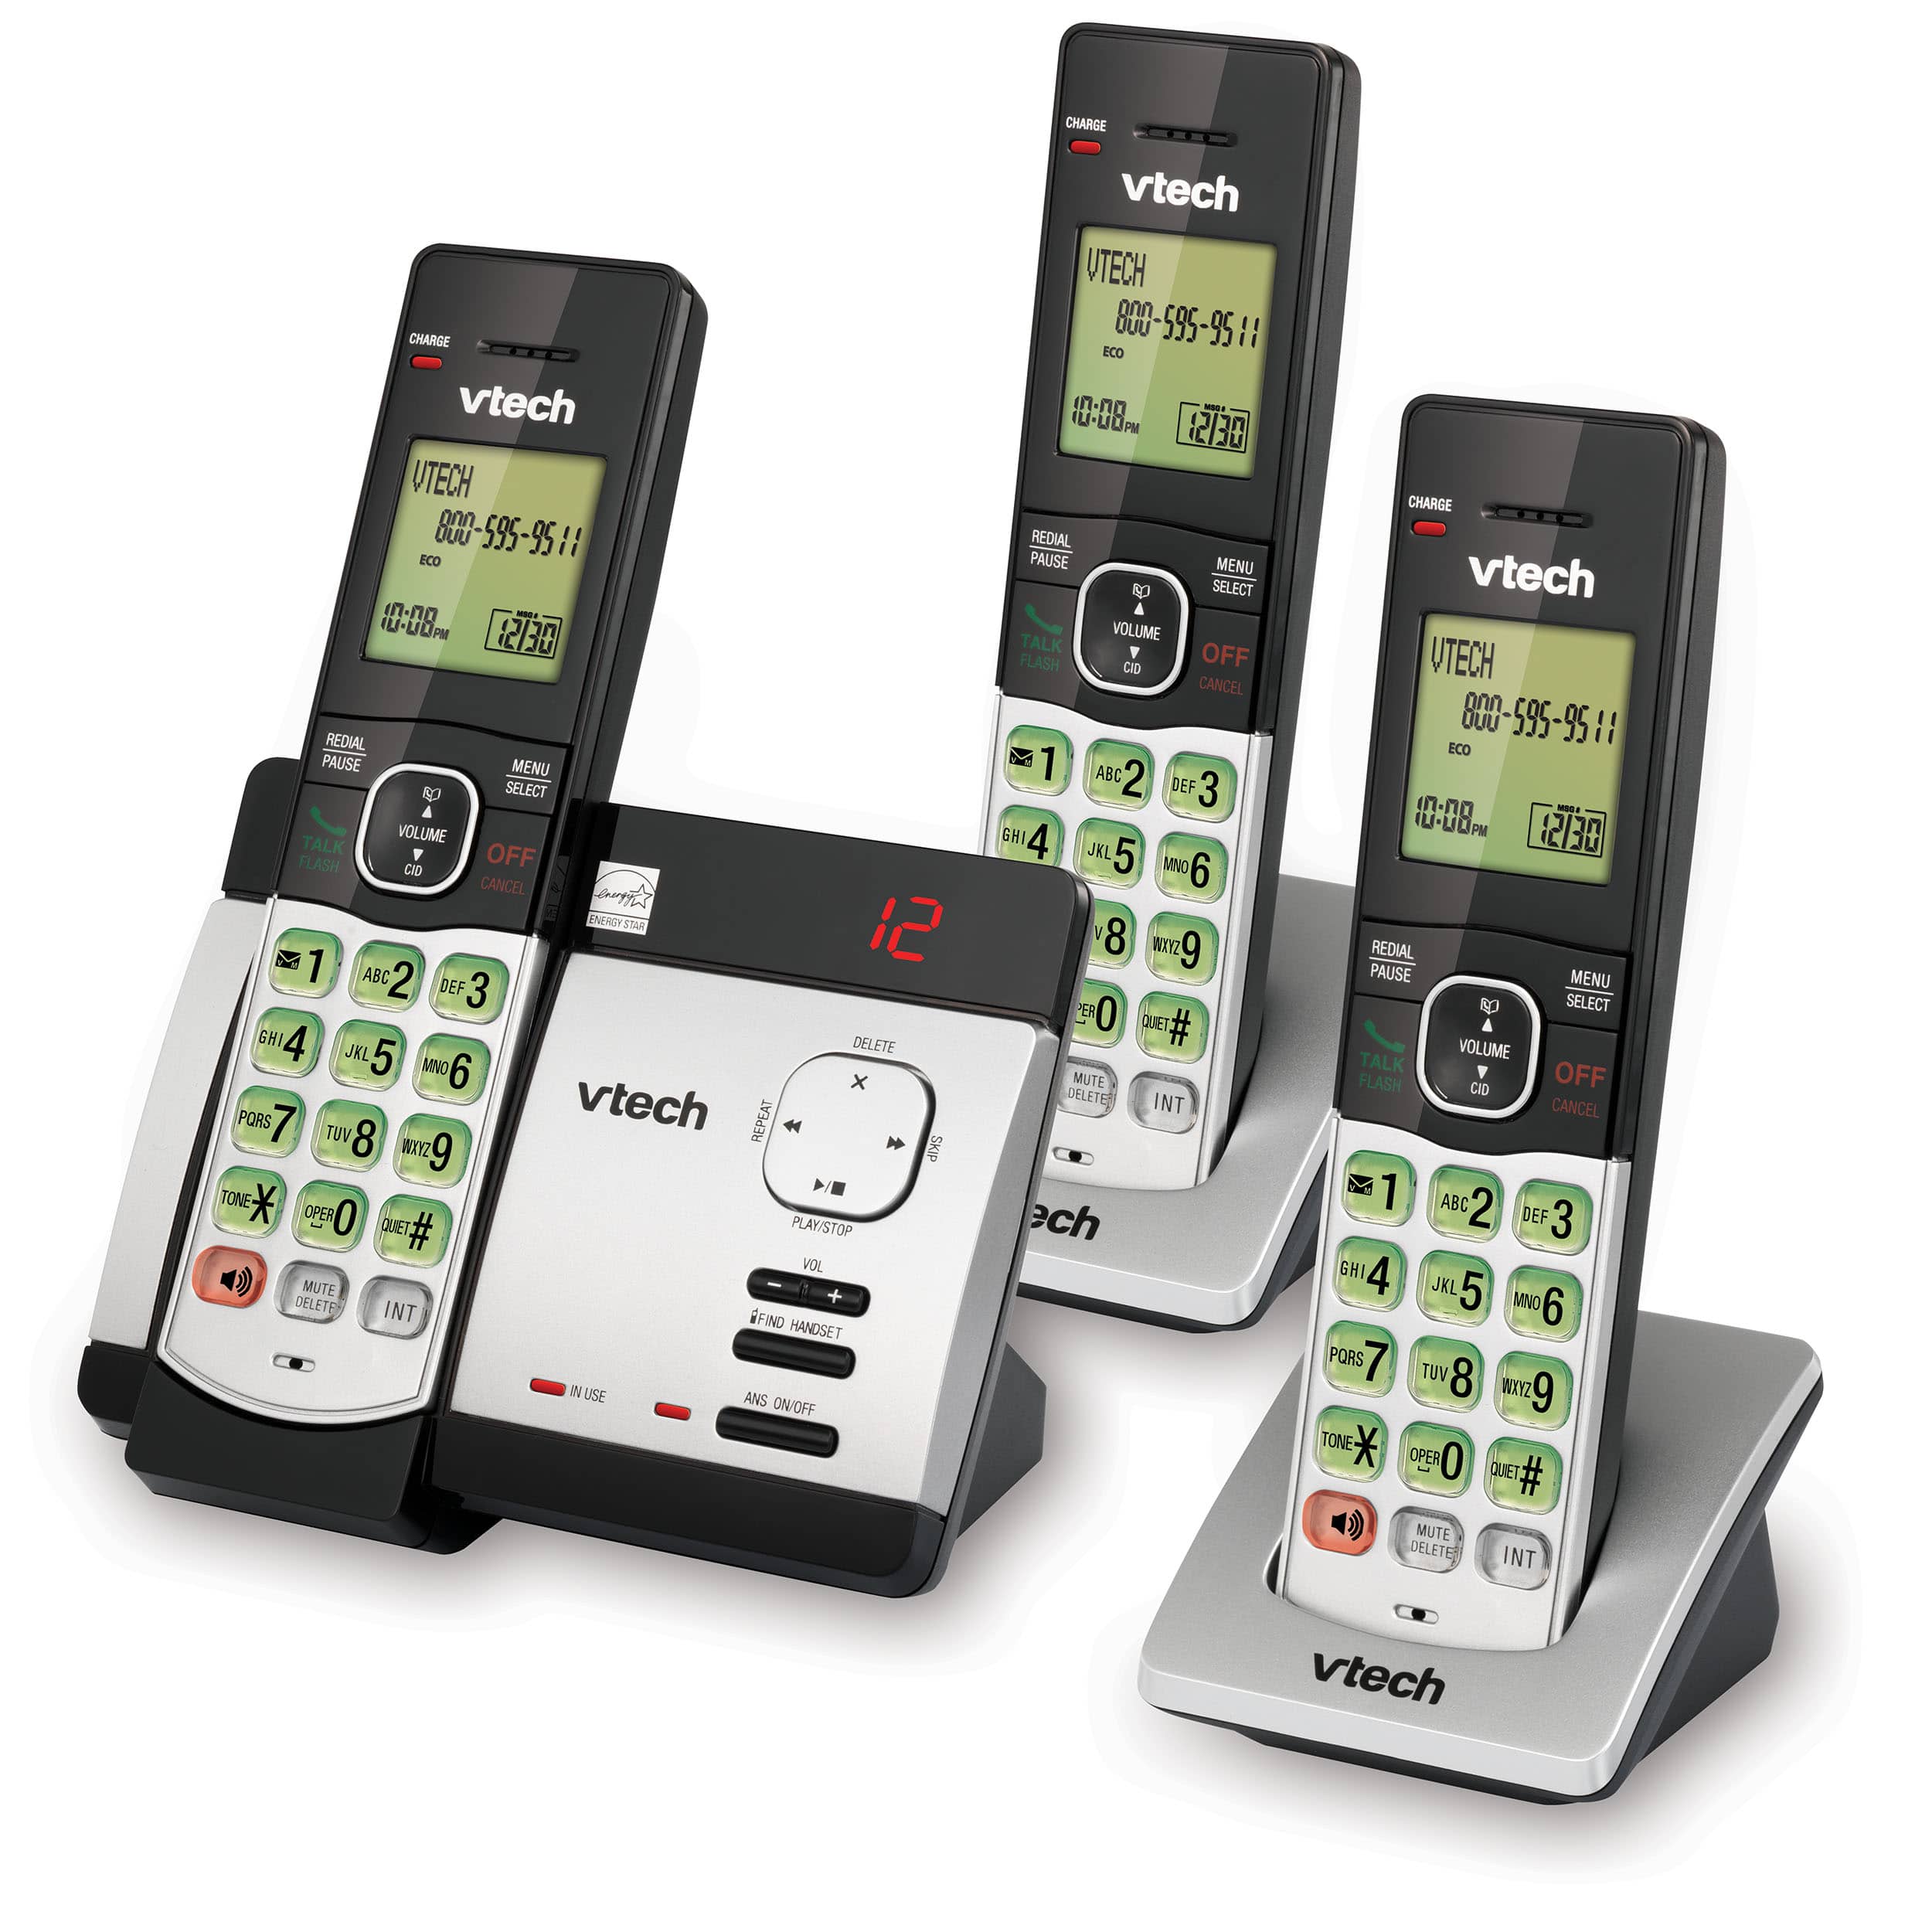 3 Handset Cordless Phone System with Caller ID/Call Waiting - view 2